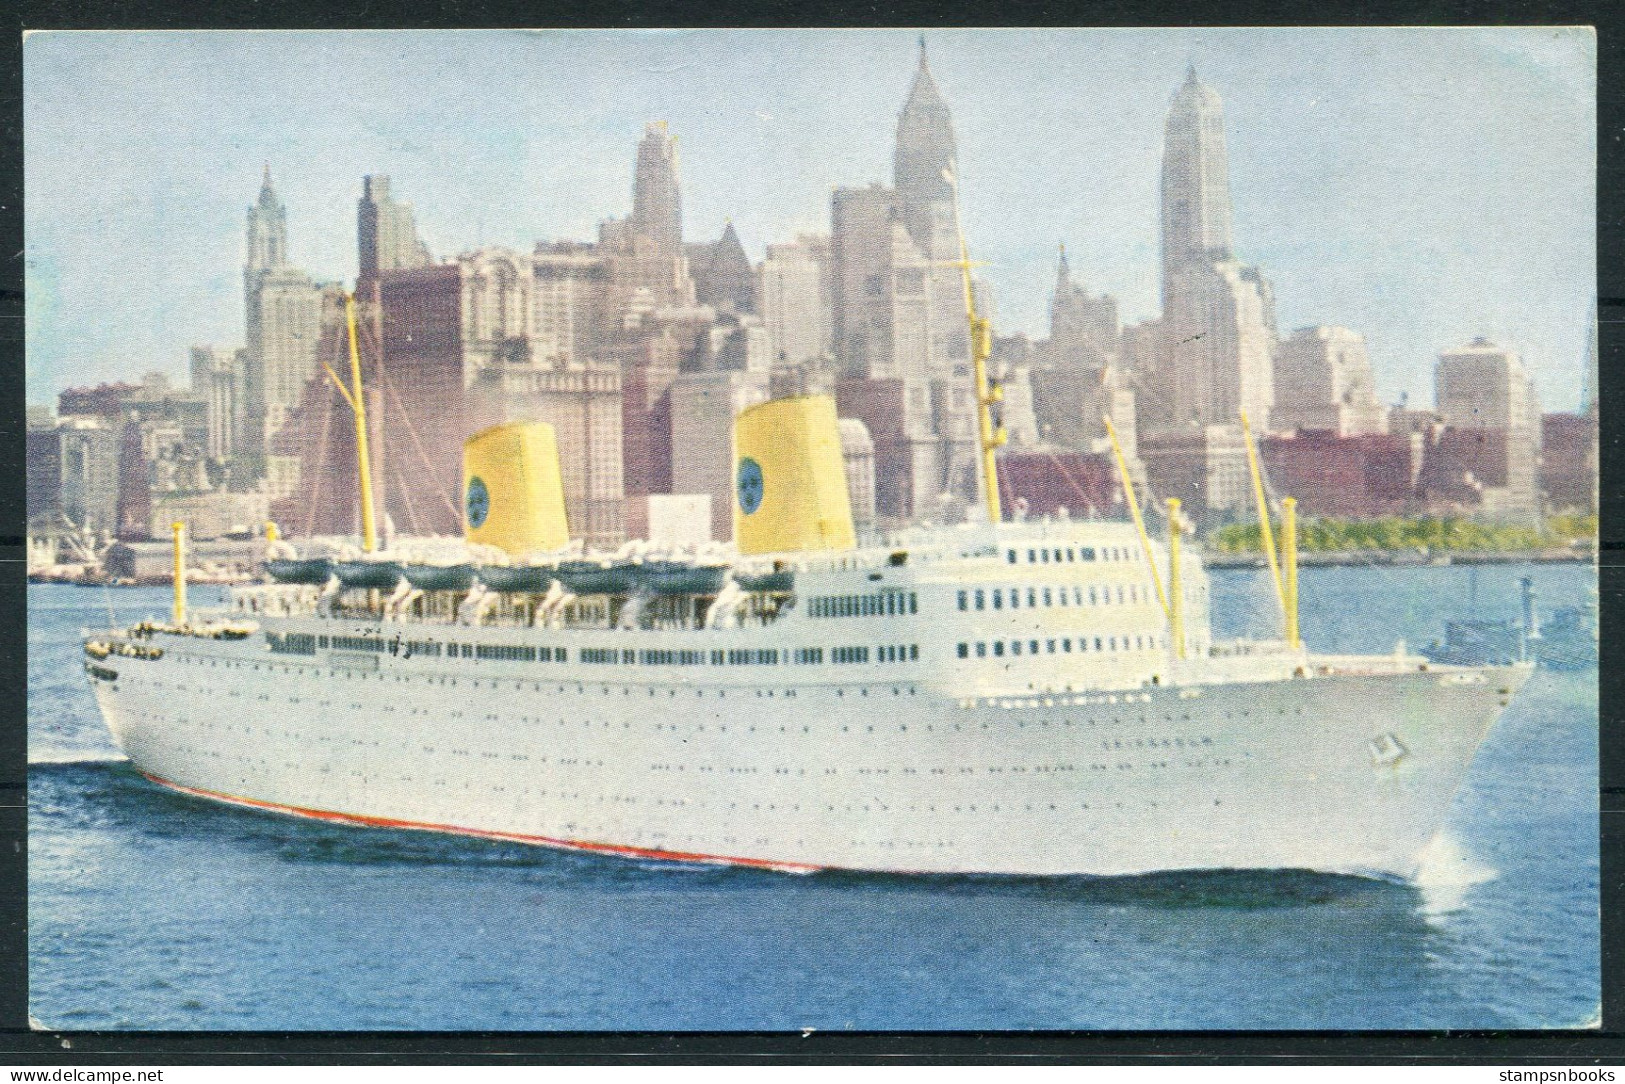 1959 Sweden Swedish American Line Postcard MS GRIPSHOLM "Cruise To The North Cape" - Briefe U. Dokumente